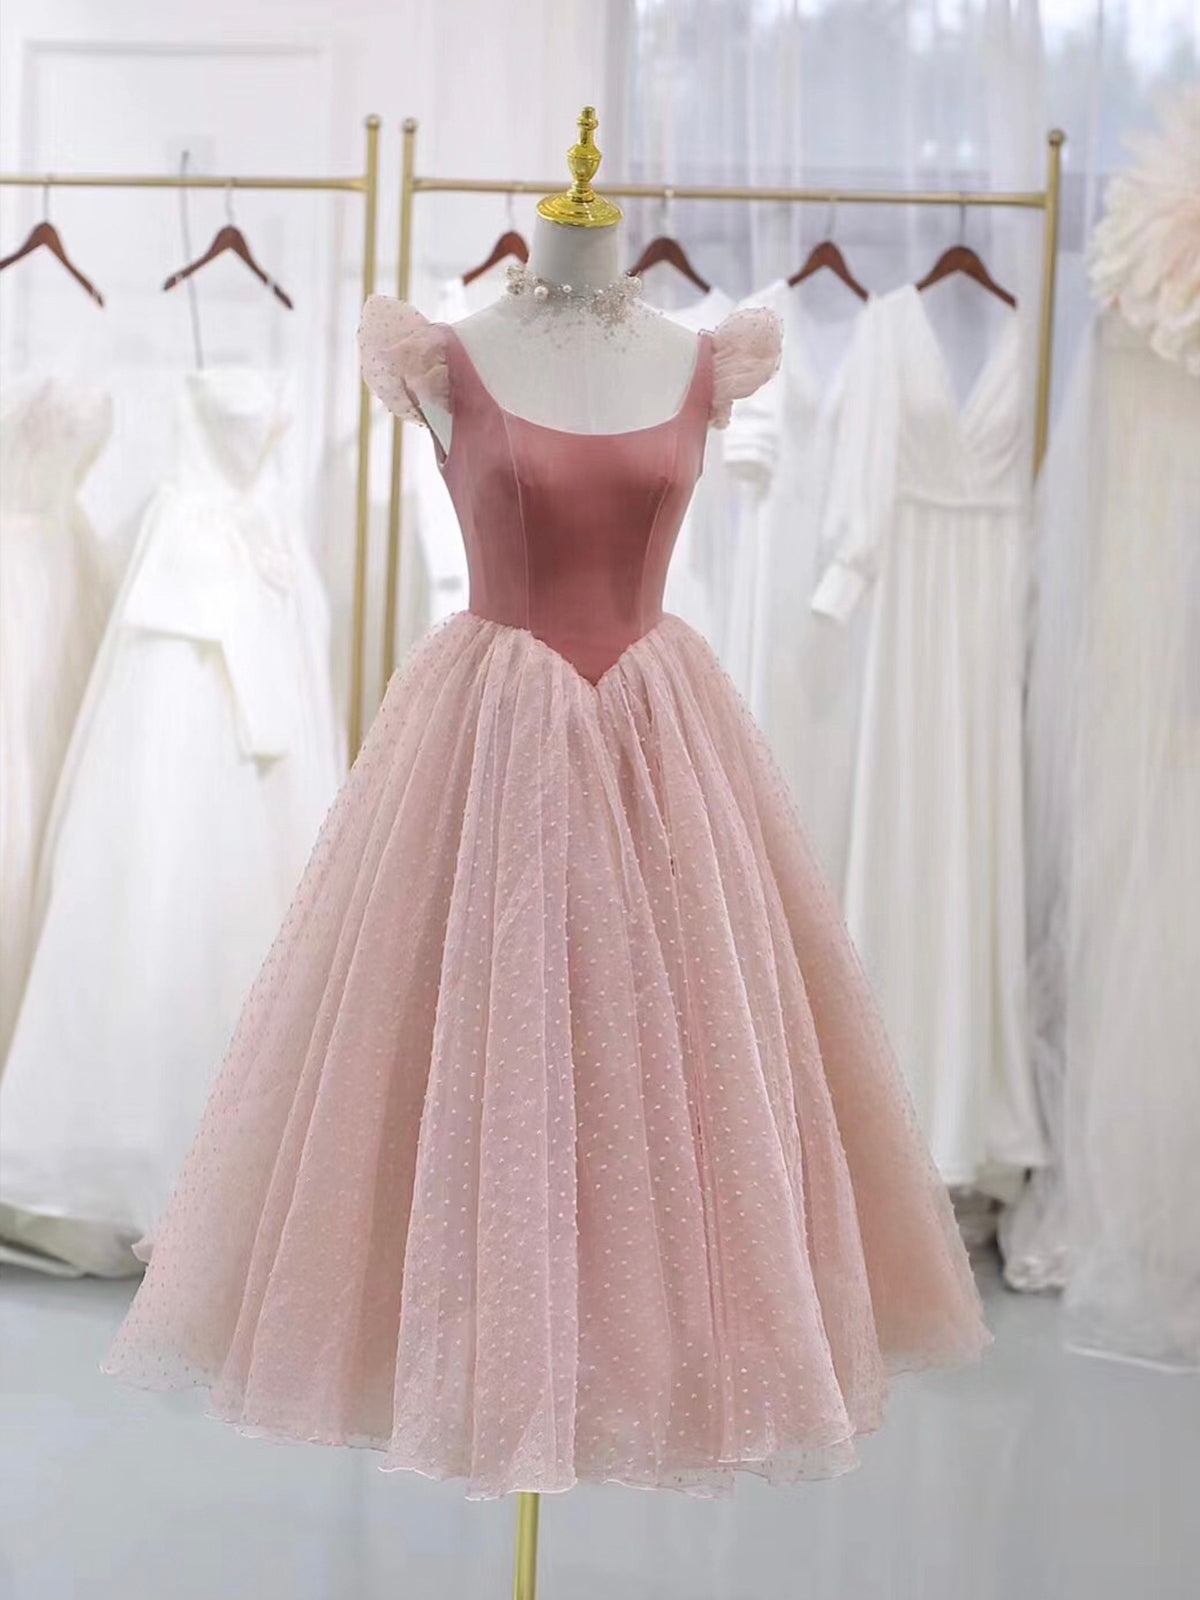 Bridesmaid Dress Peach, Pink Velvet Tulle Short Prom Dress, Lovely A-Line Homecoming Party Dress